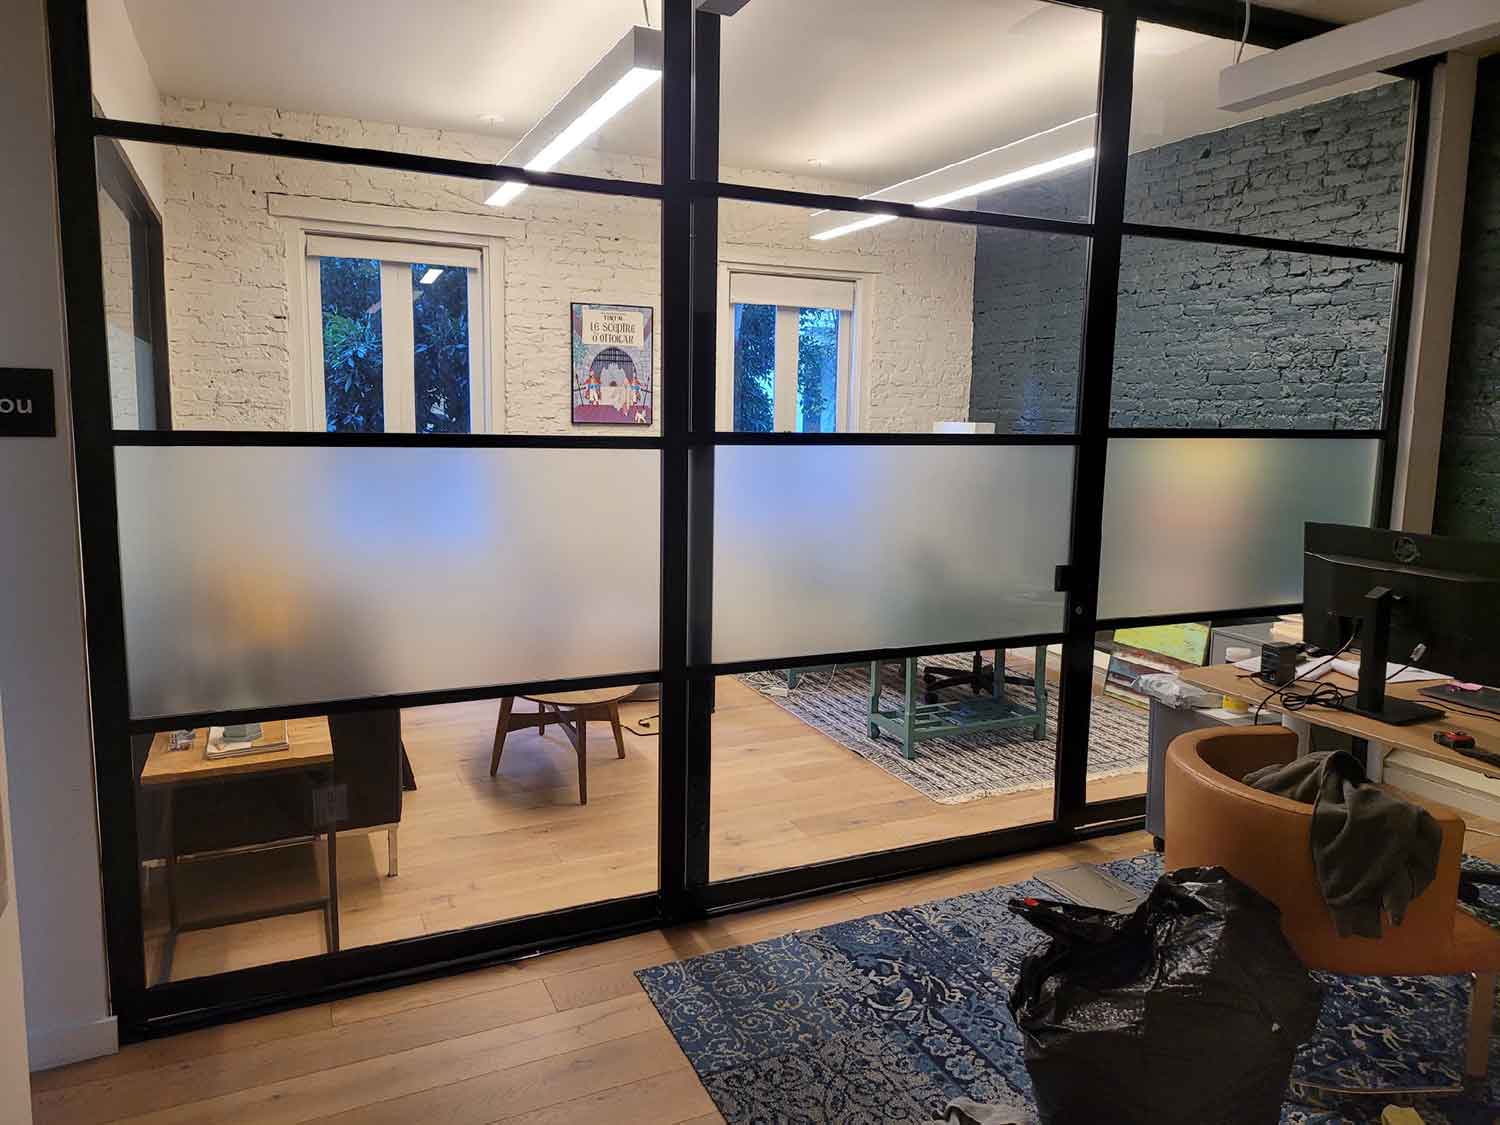 The ClimatePro team added 3M Window Tint to this San Francisco office windows and doors. Get a free estimate for privacy window tint today.